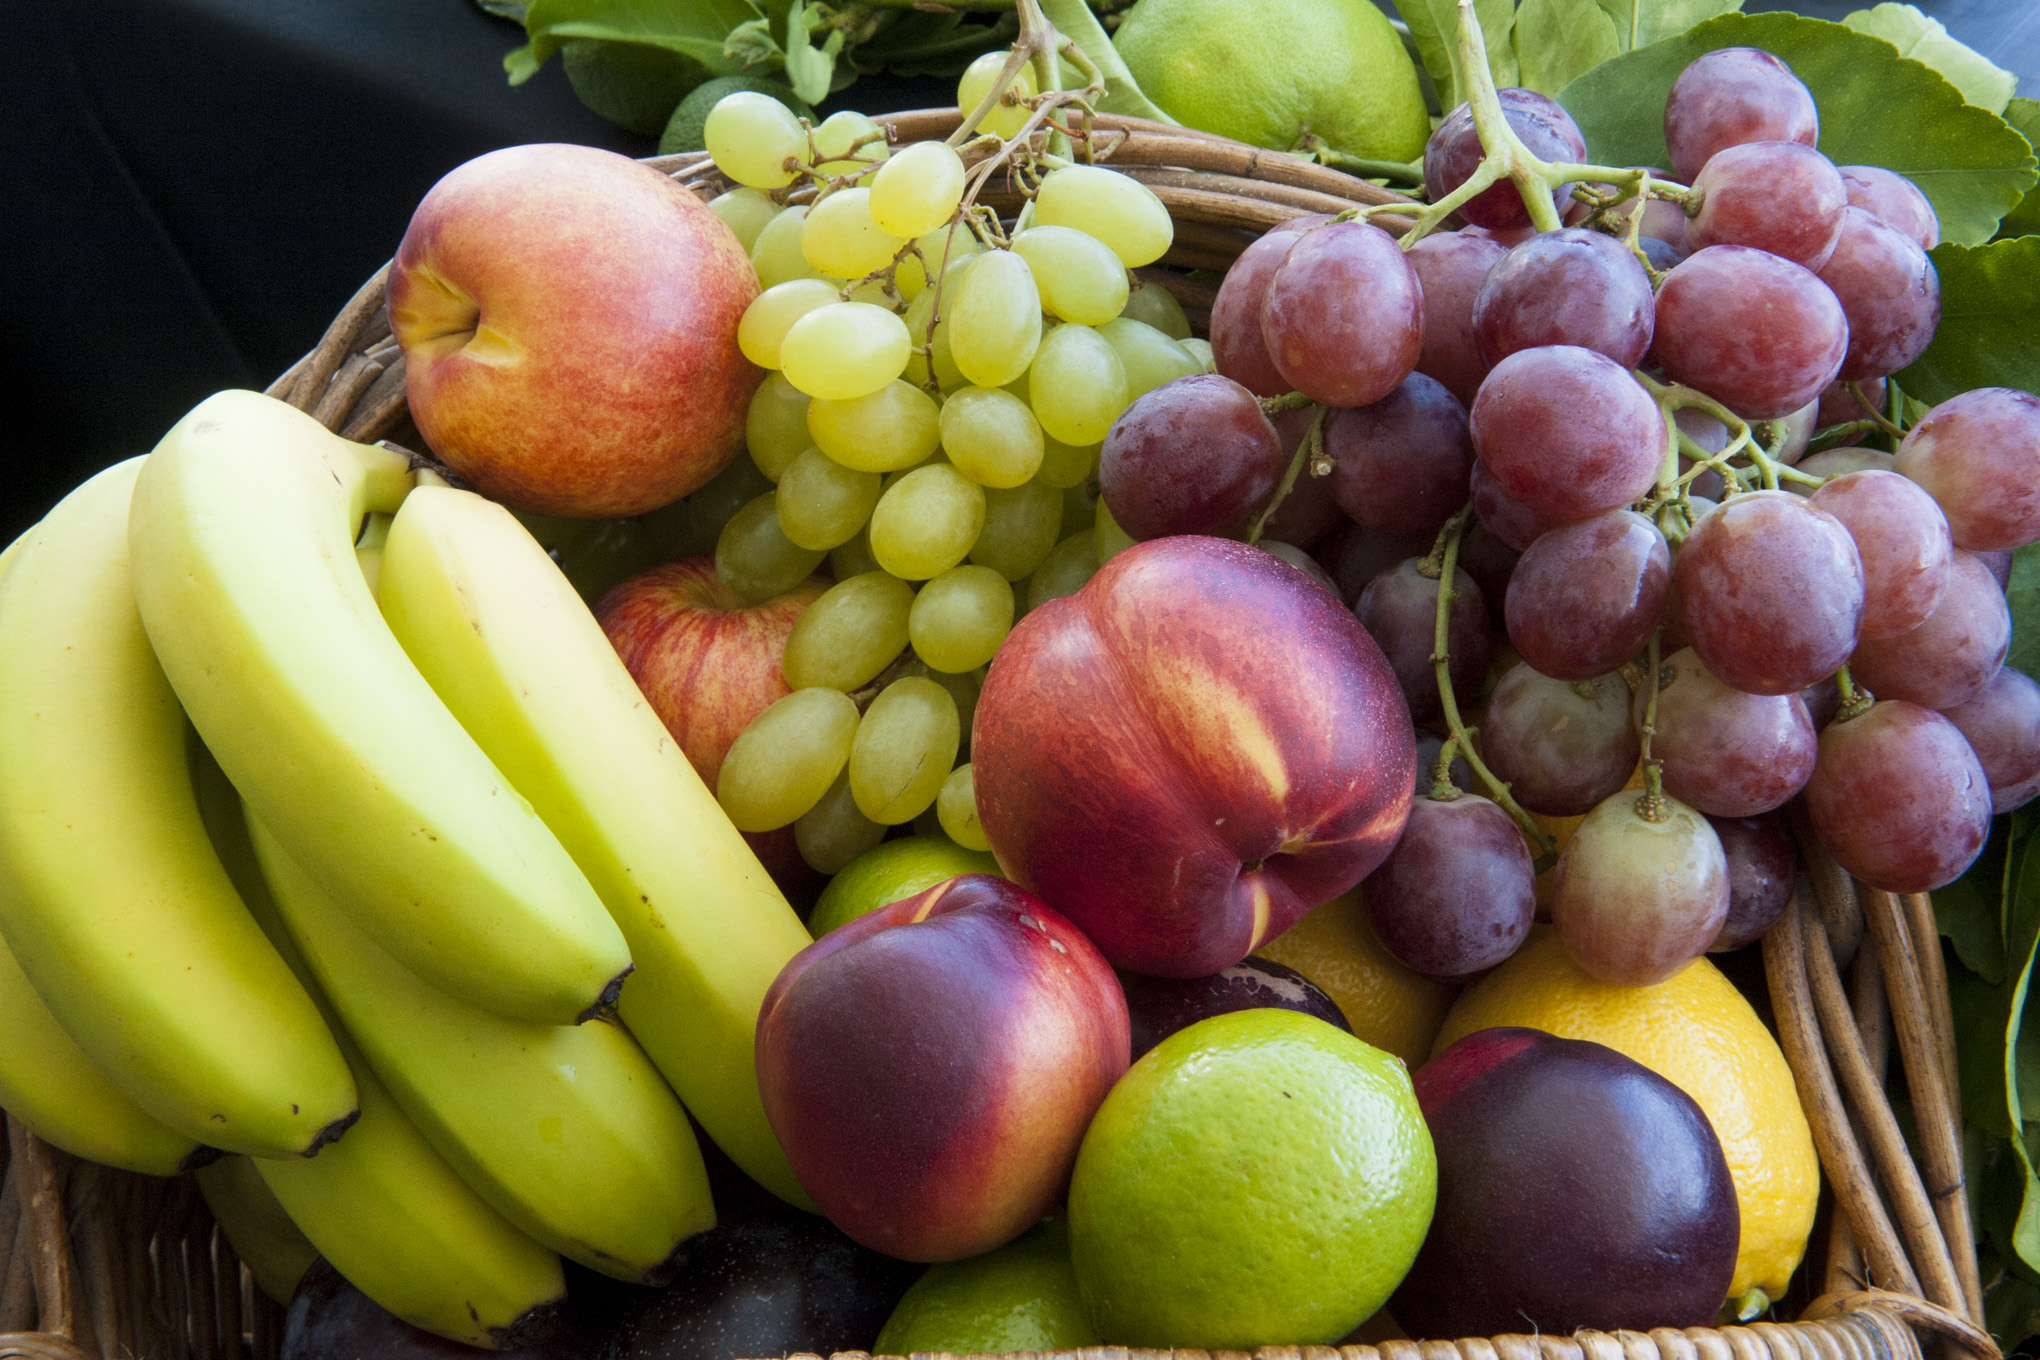 Mixed storage of fruits and vegetables | Agriculture and Food